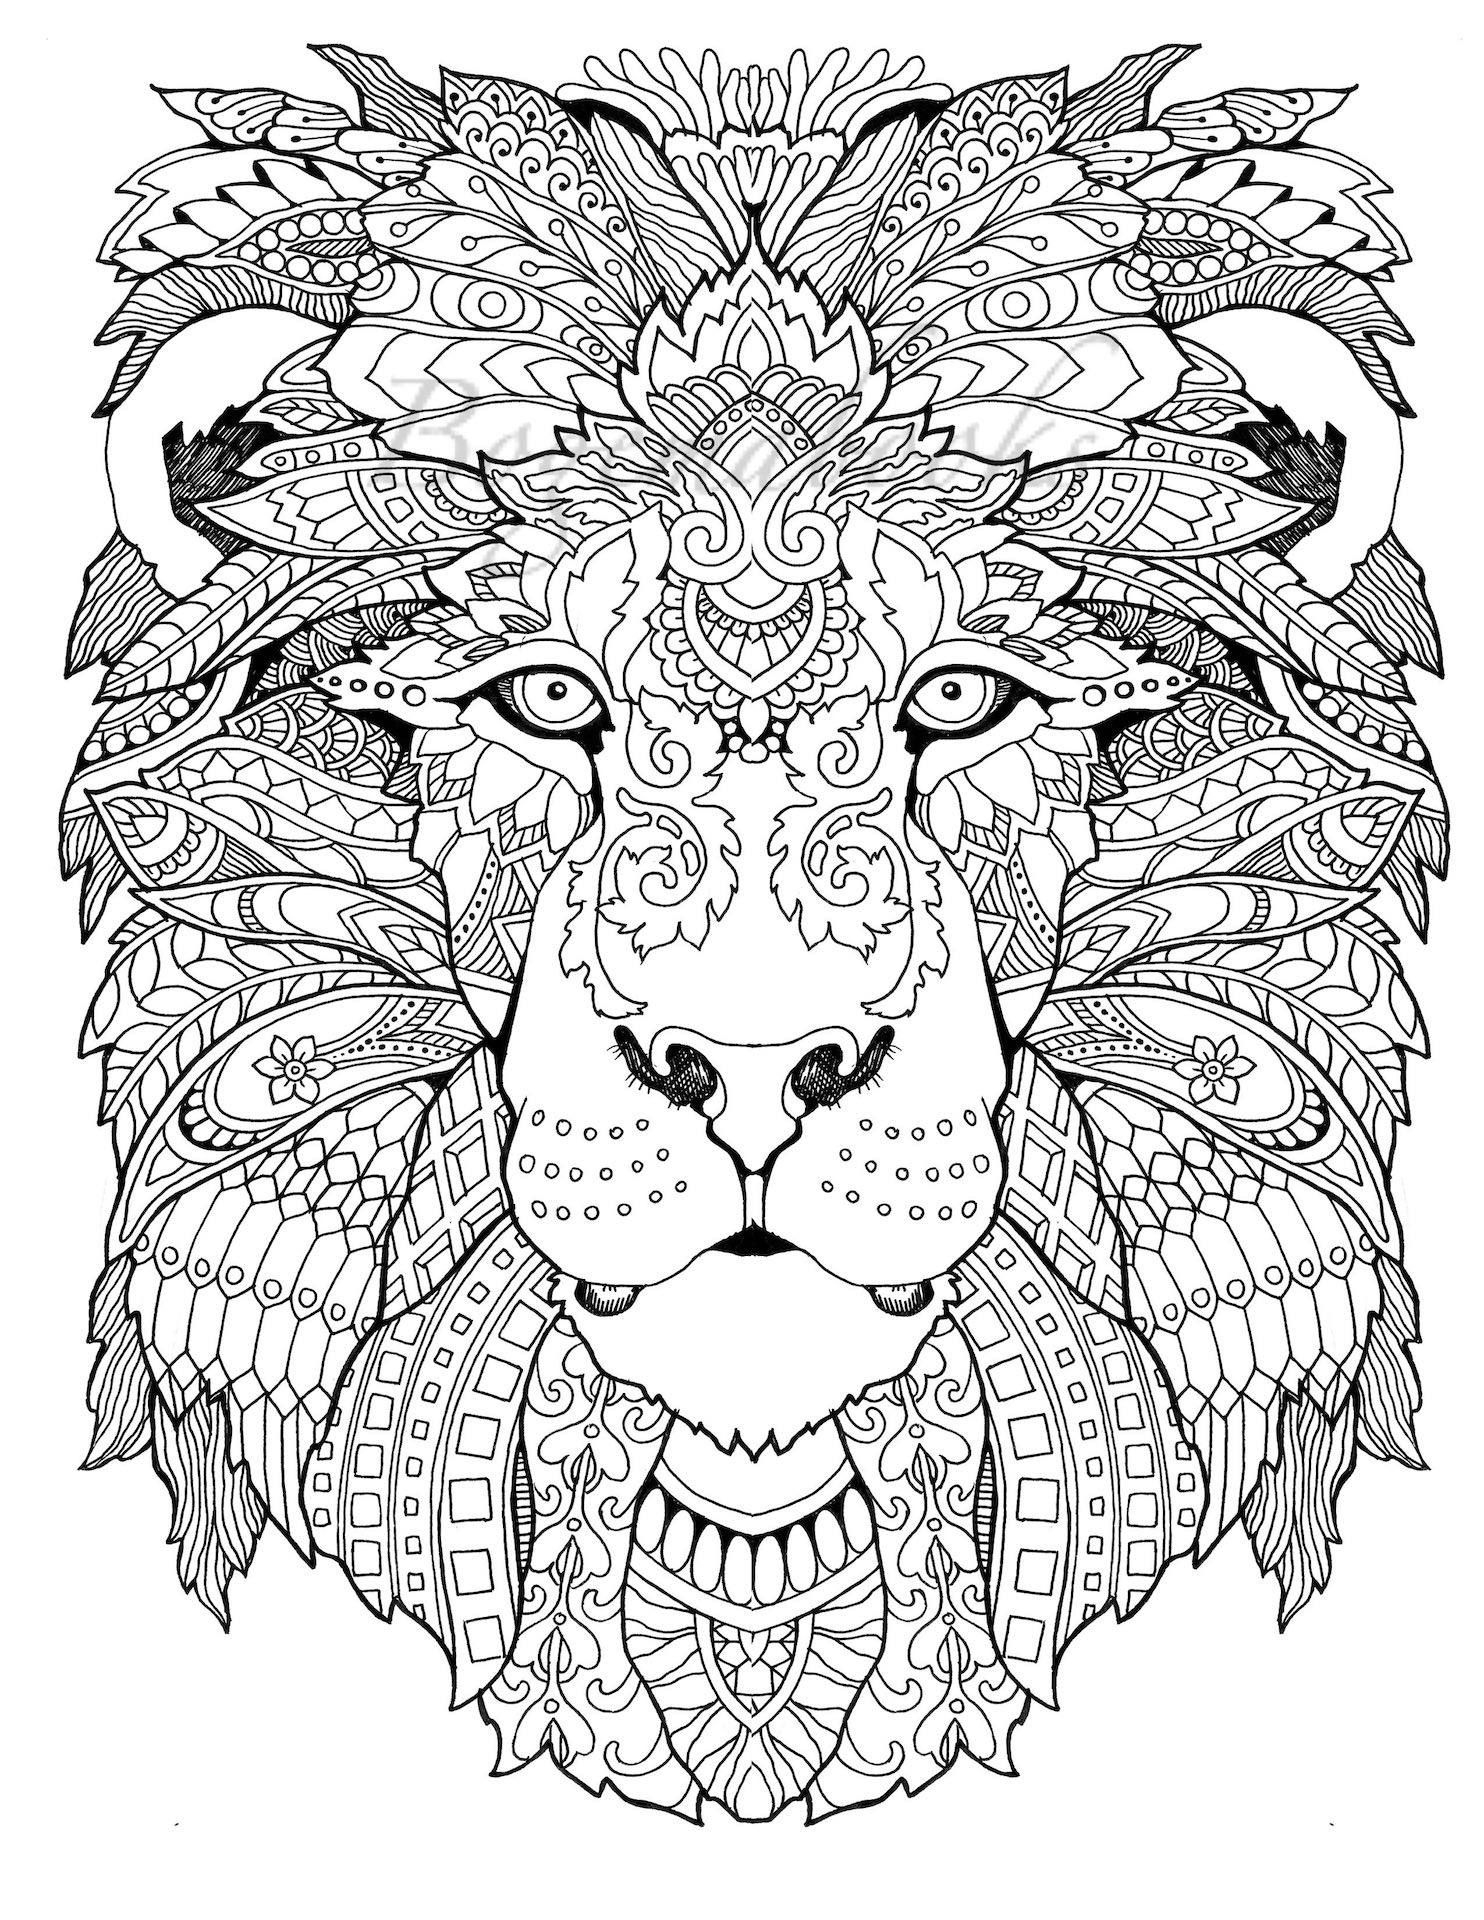 Awesome Animals Adult Coloring Book Coloring Pages Pdf | Awesome - Free Printable Coloring Pages For Adults Pdf